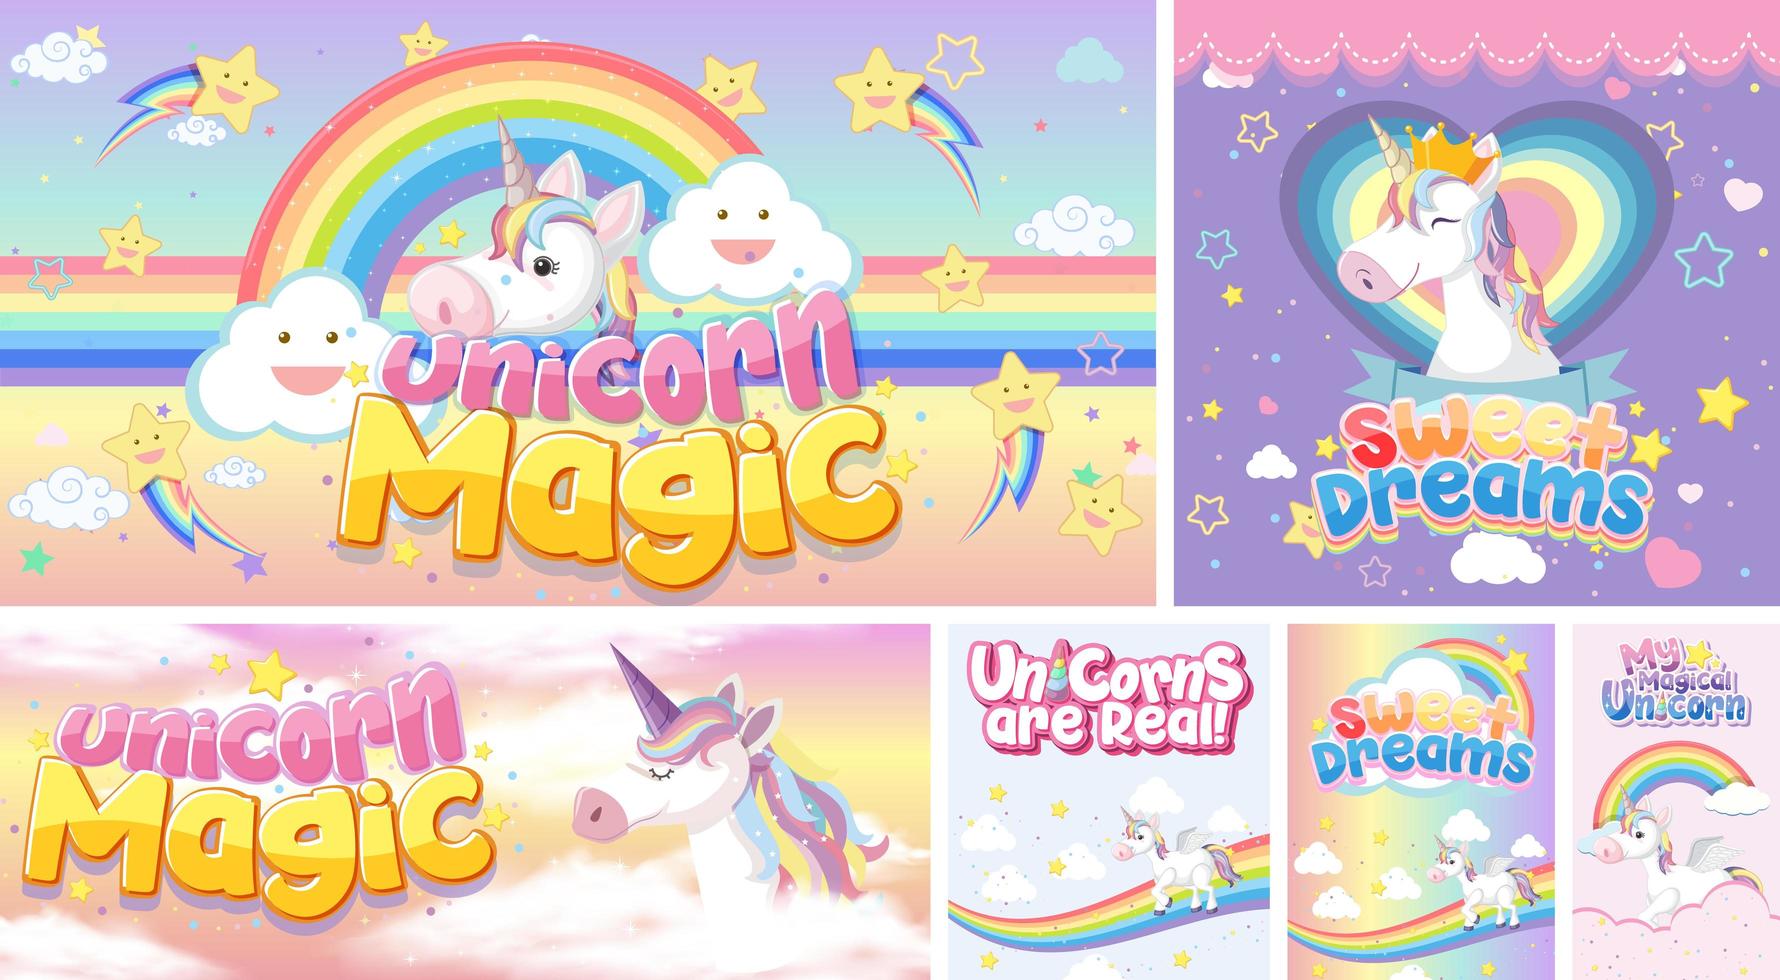 Cute unicorn banner on pastel background color vector